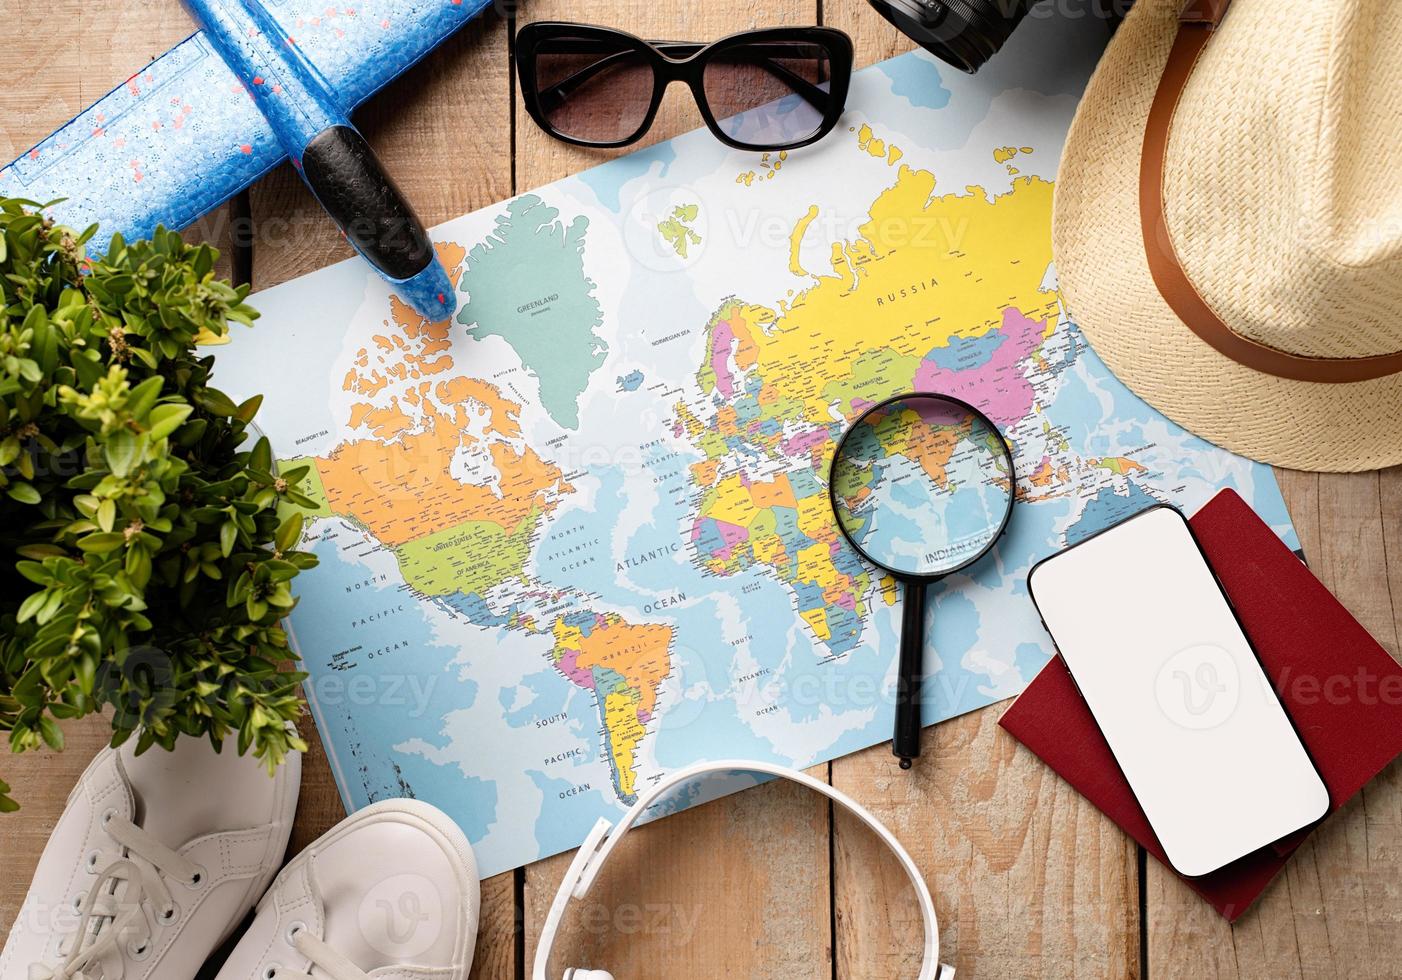 Flat lay traveler accessories on map, camera, glasses, digital devices photo